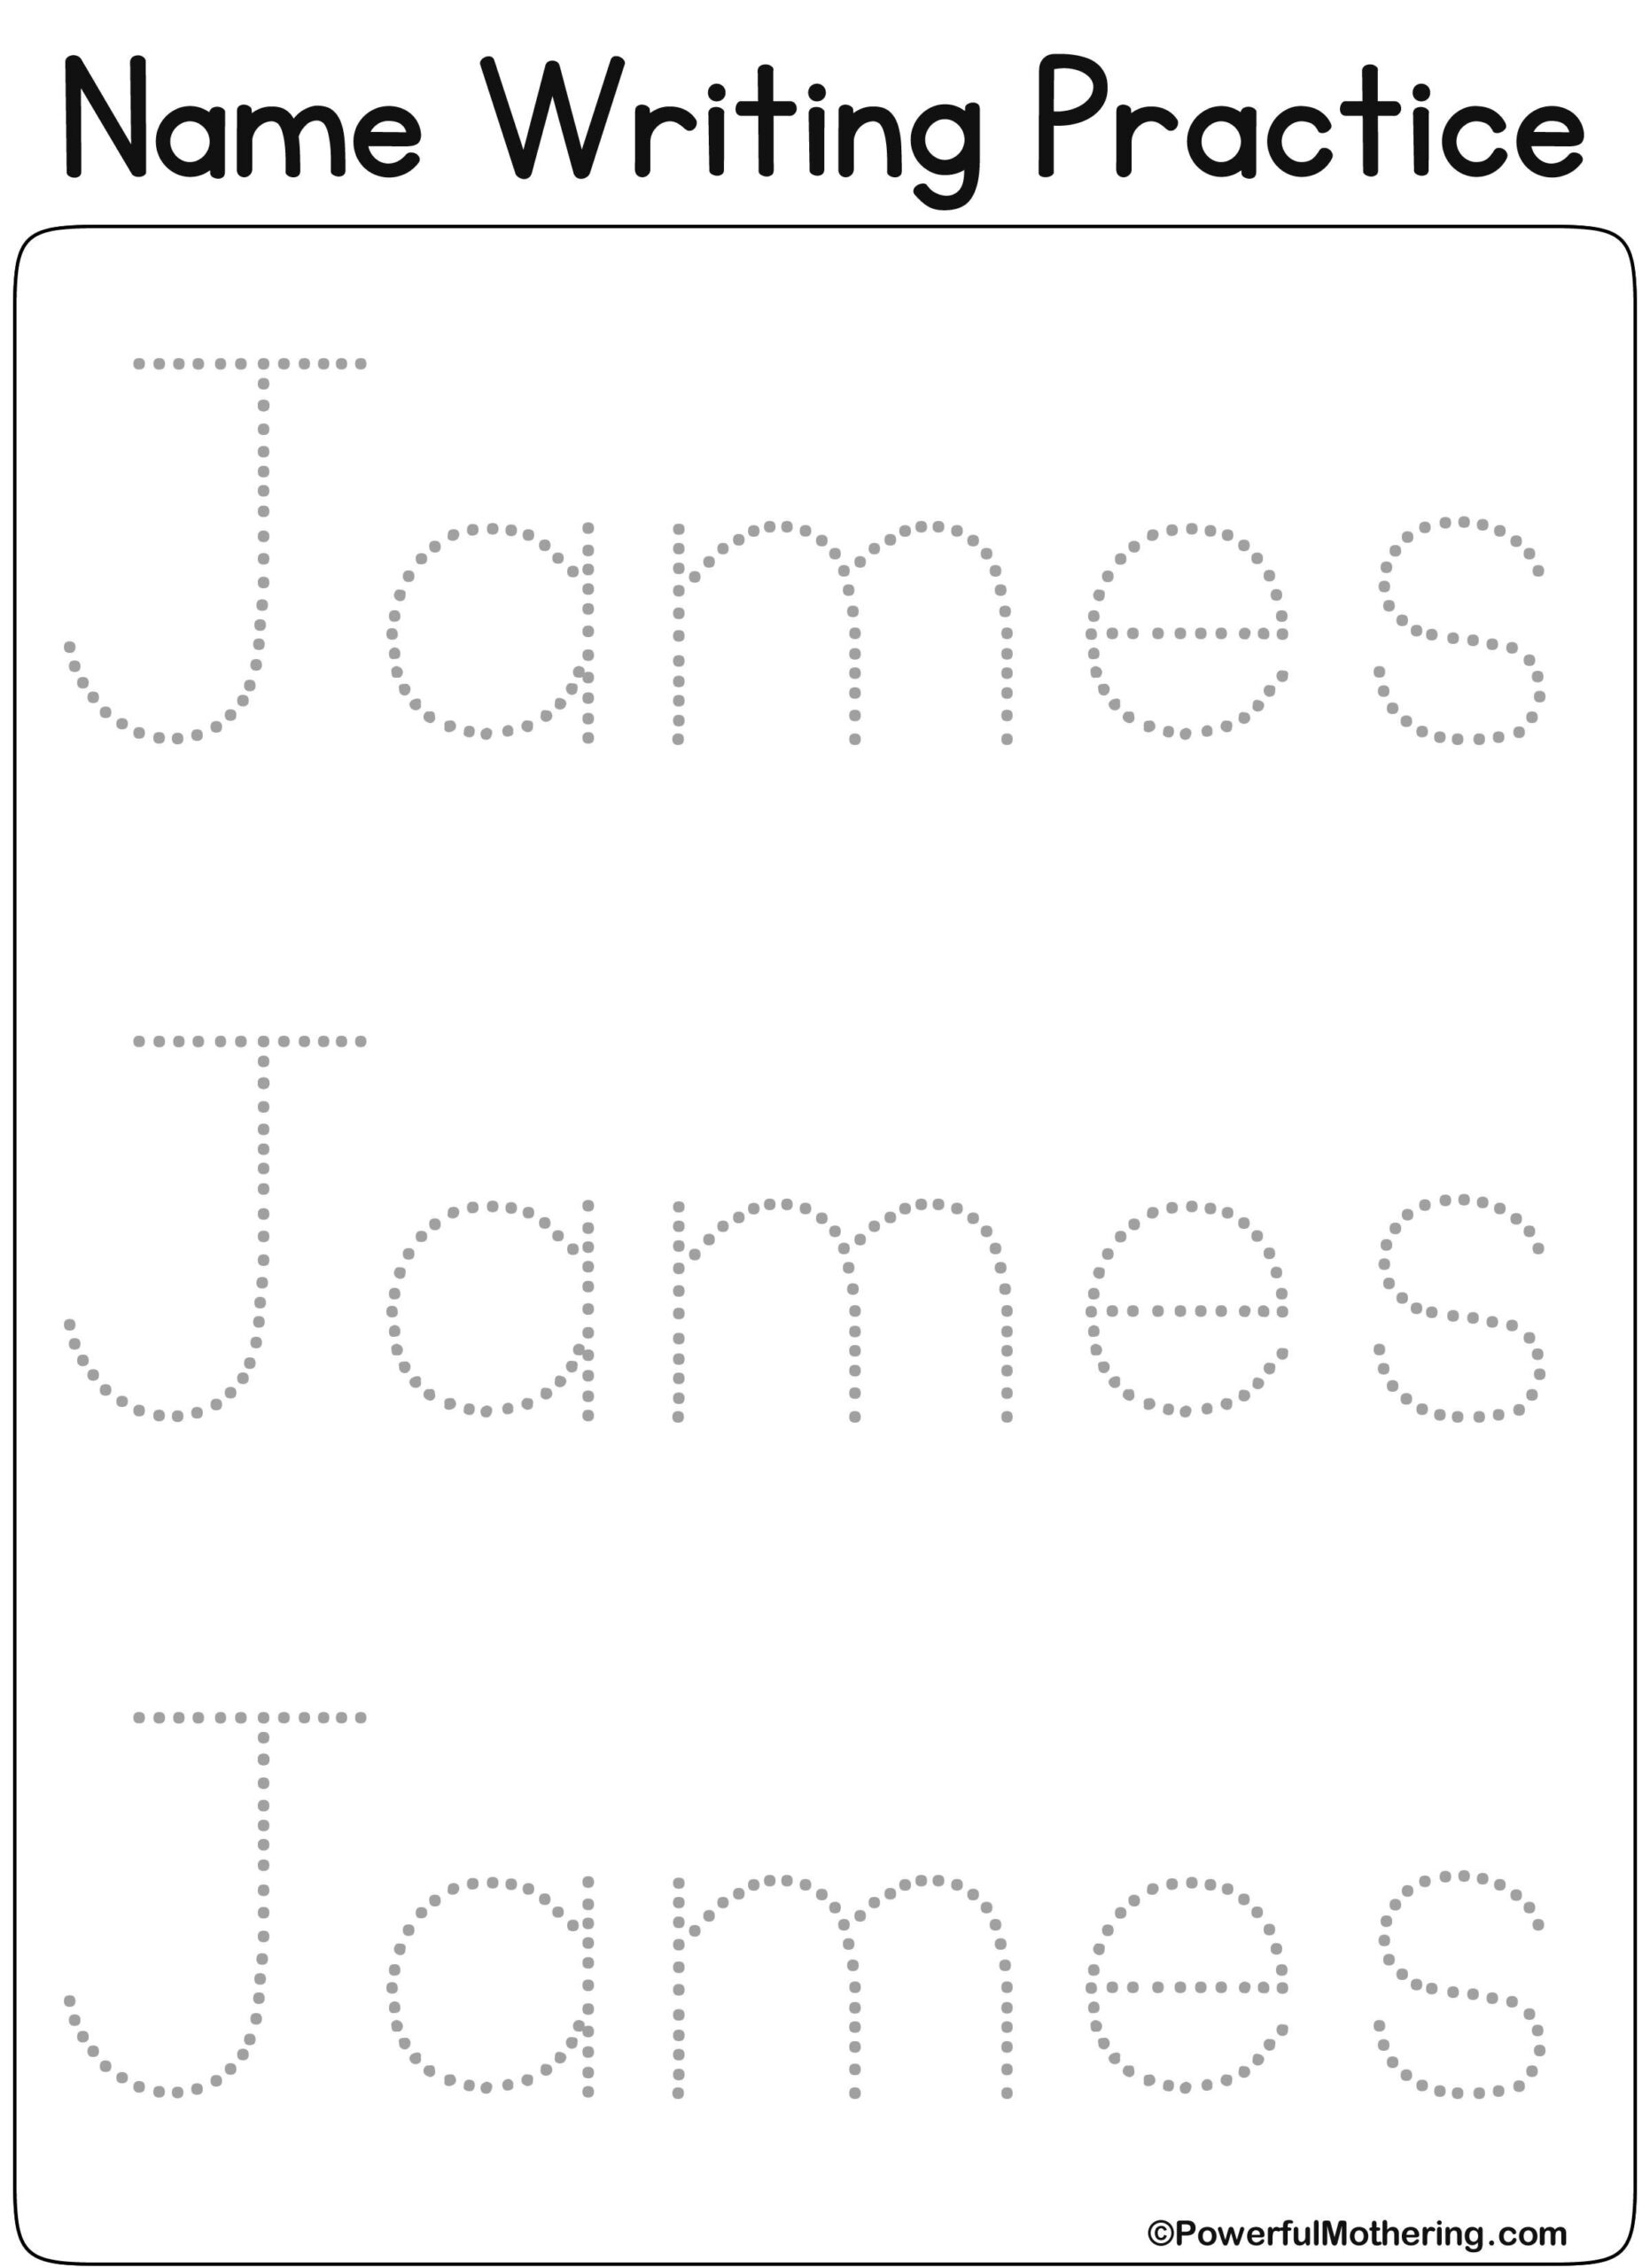 Www.createprintables Custom_Name_Get.php?text&amp;amp;#x3D throughout Tracing Name James